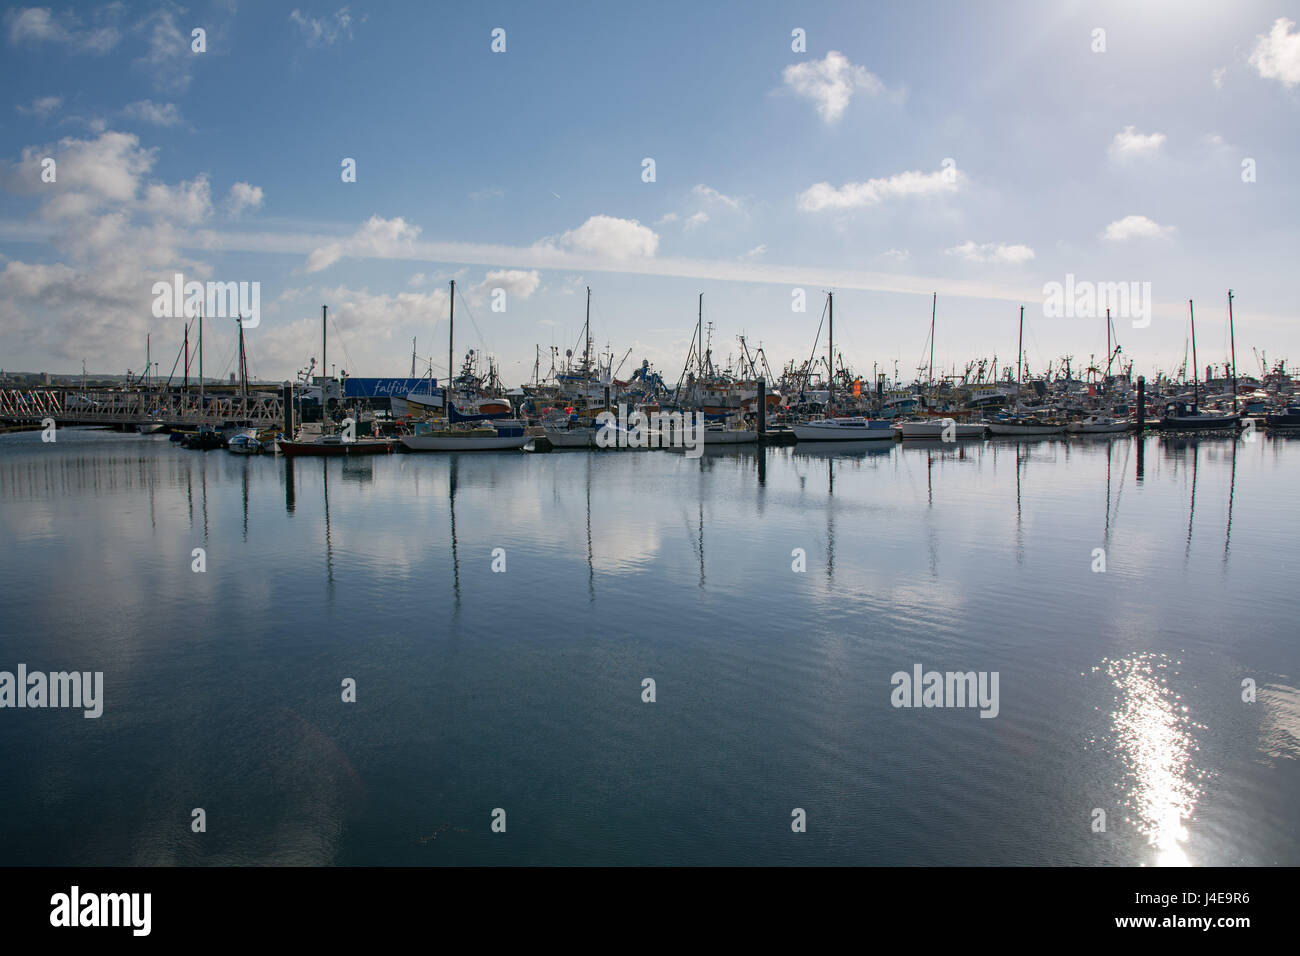 Newlyn, Cornwall, UK. 13th May 2017. UK Weather. After a wet Friday the sun shines this morning over the baots at Newlyn Harbour Credit: Simon Maycock/Alamy Live News Stock Photo